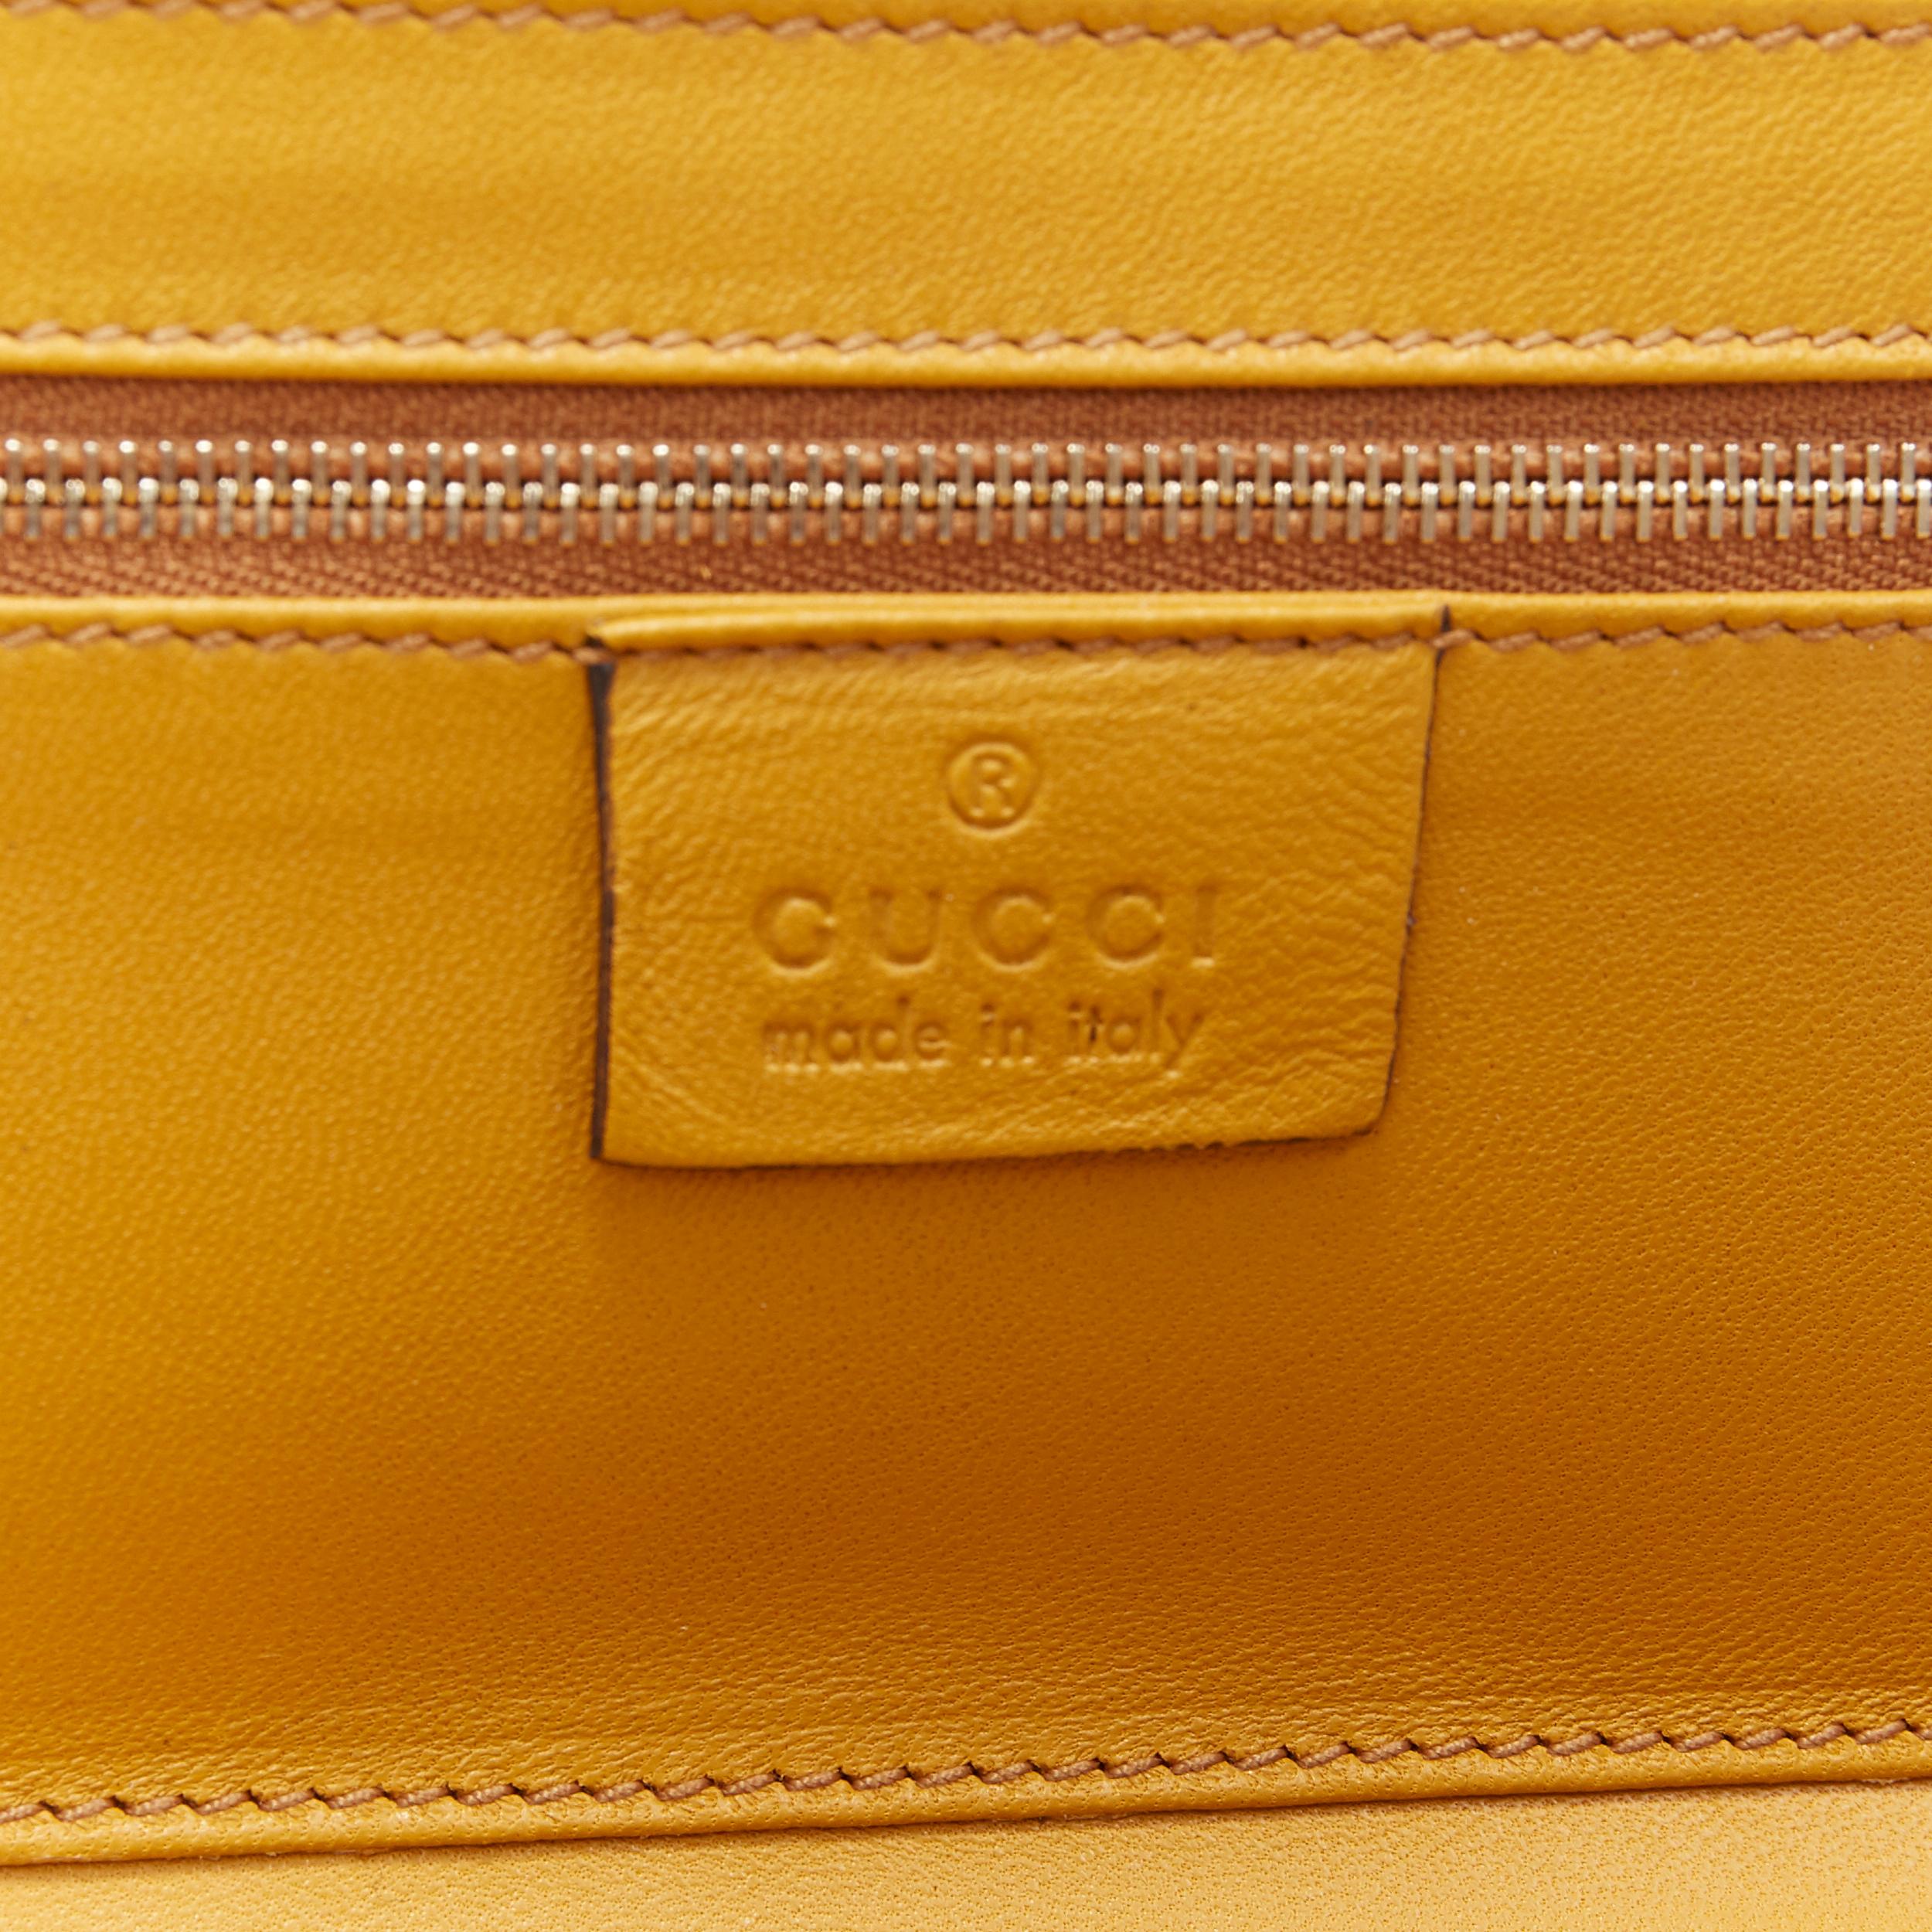 Women's GUCCI mustard yellow suede crystal embellished leather trimmed box clutch bag